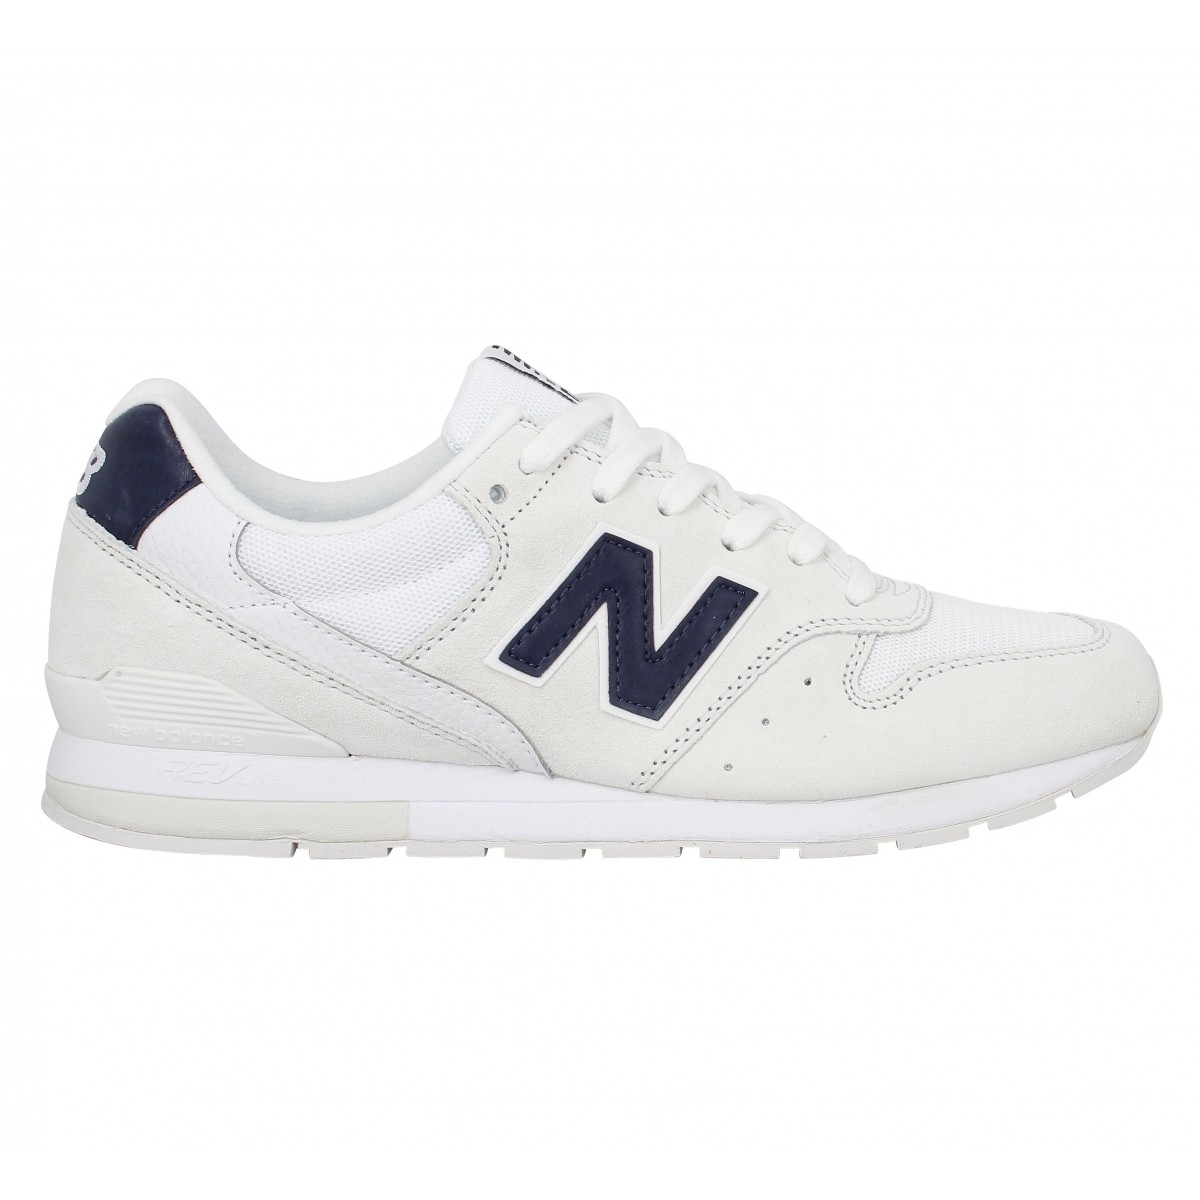 nb 996 chaussures